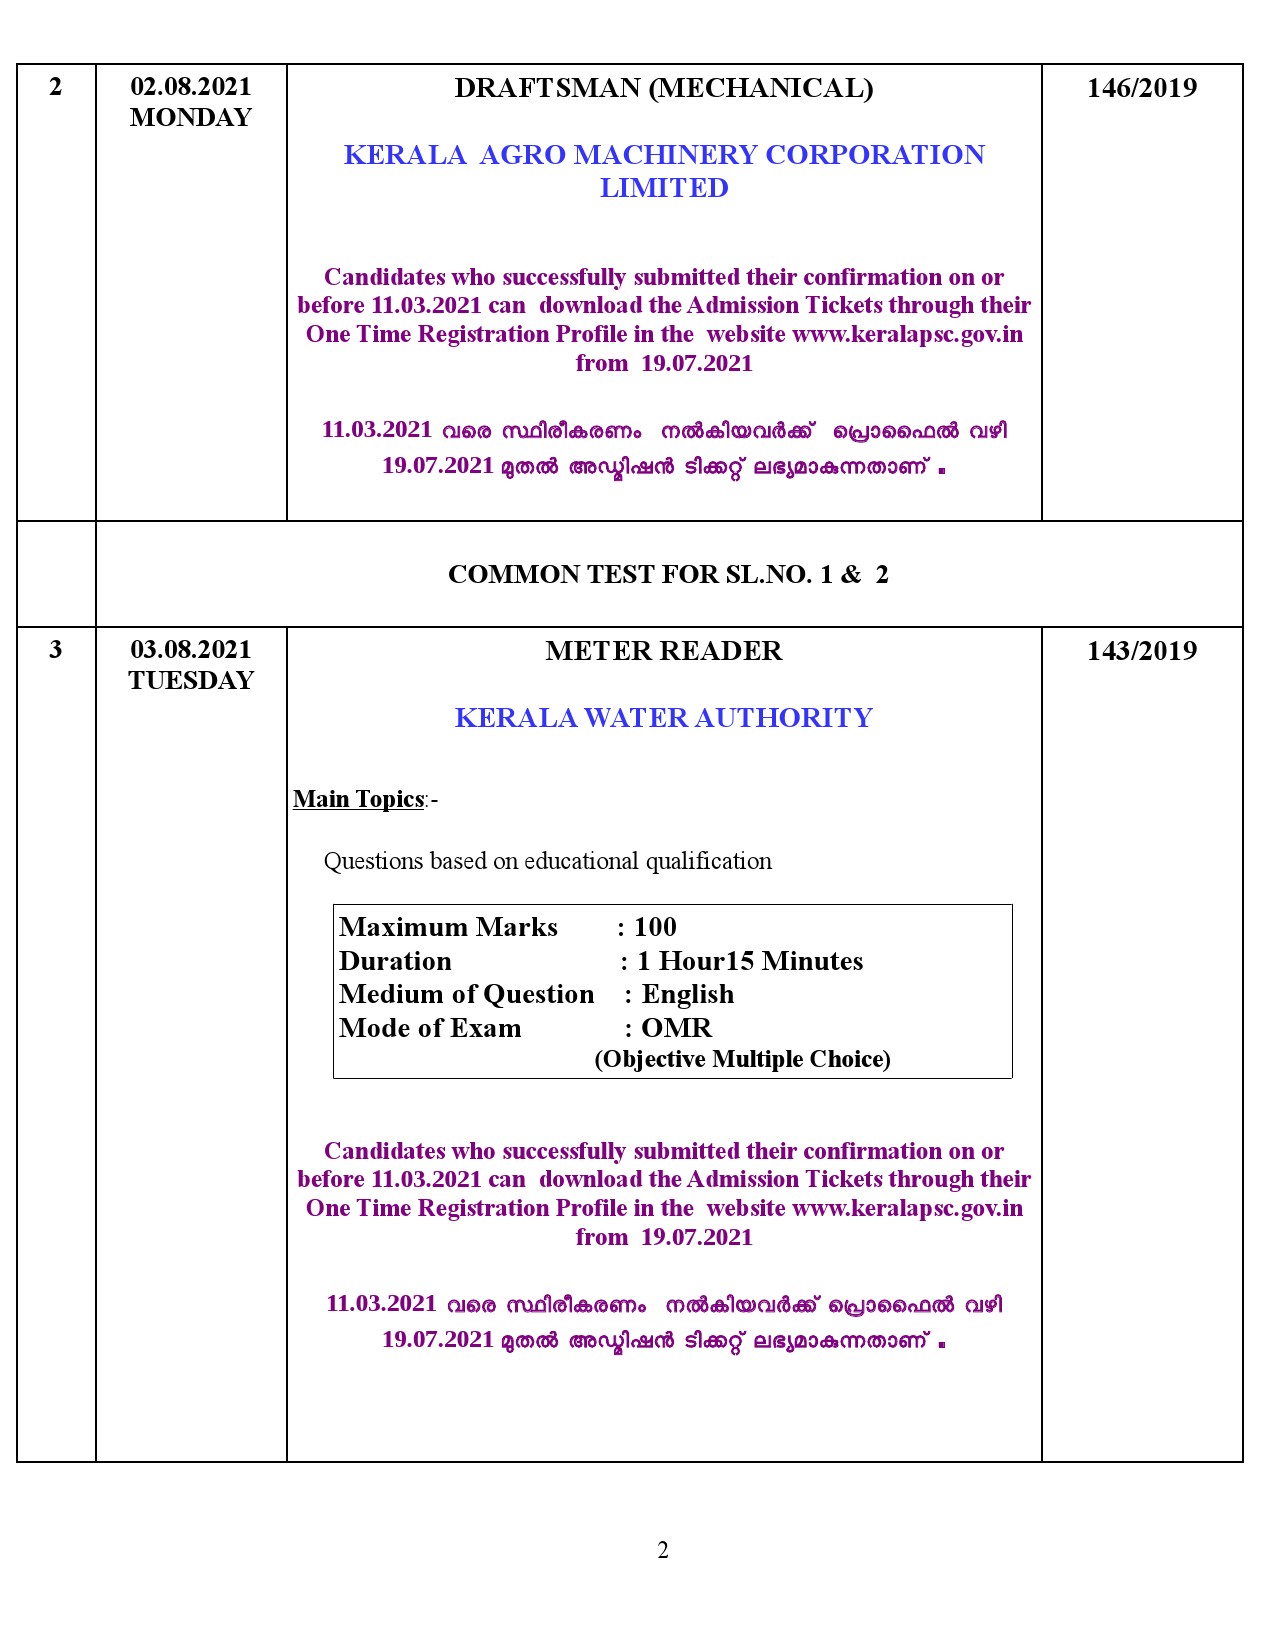 KPSC Examination Programme For The Month Of August 2021 - Notification Image 2